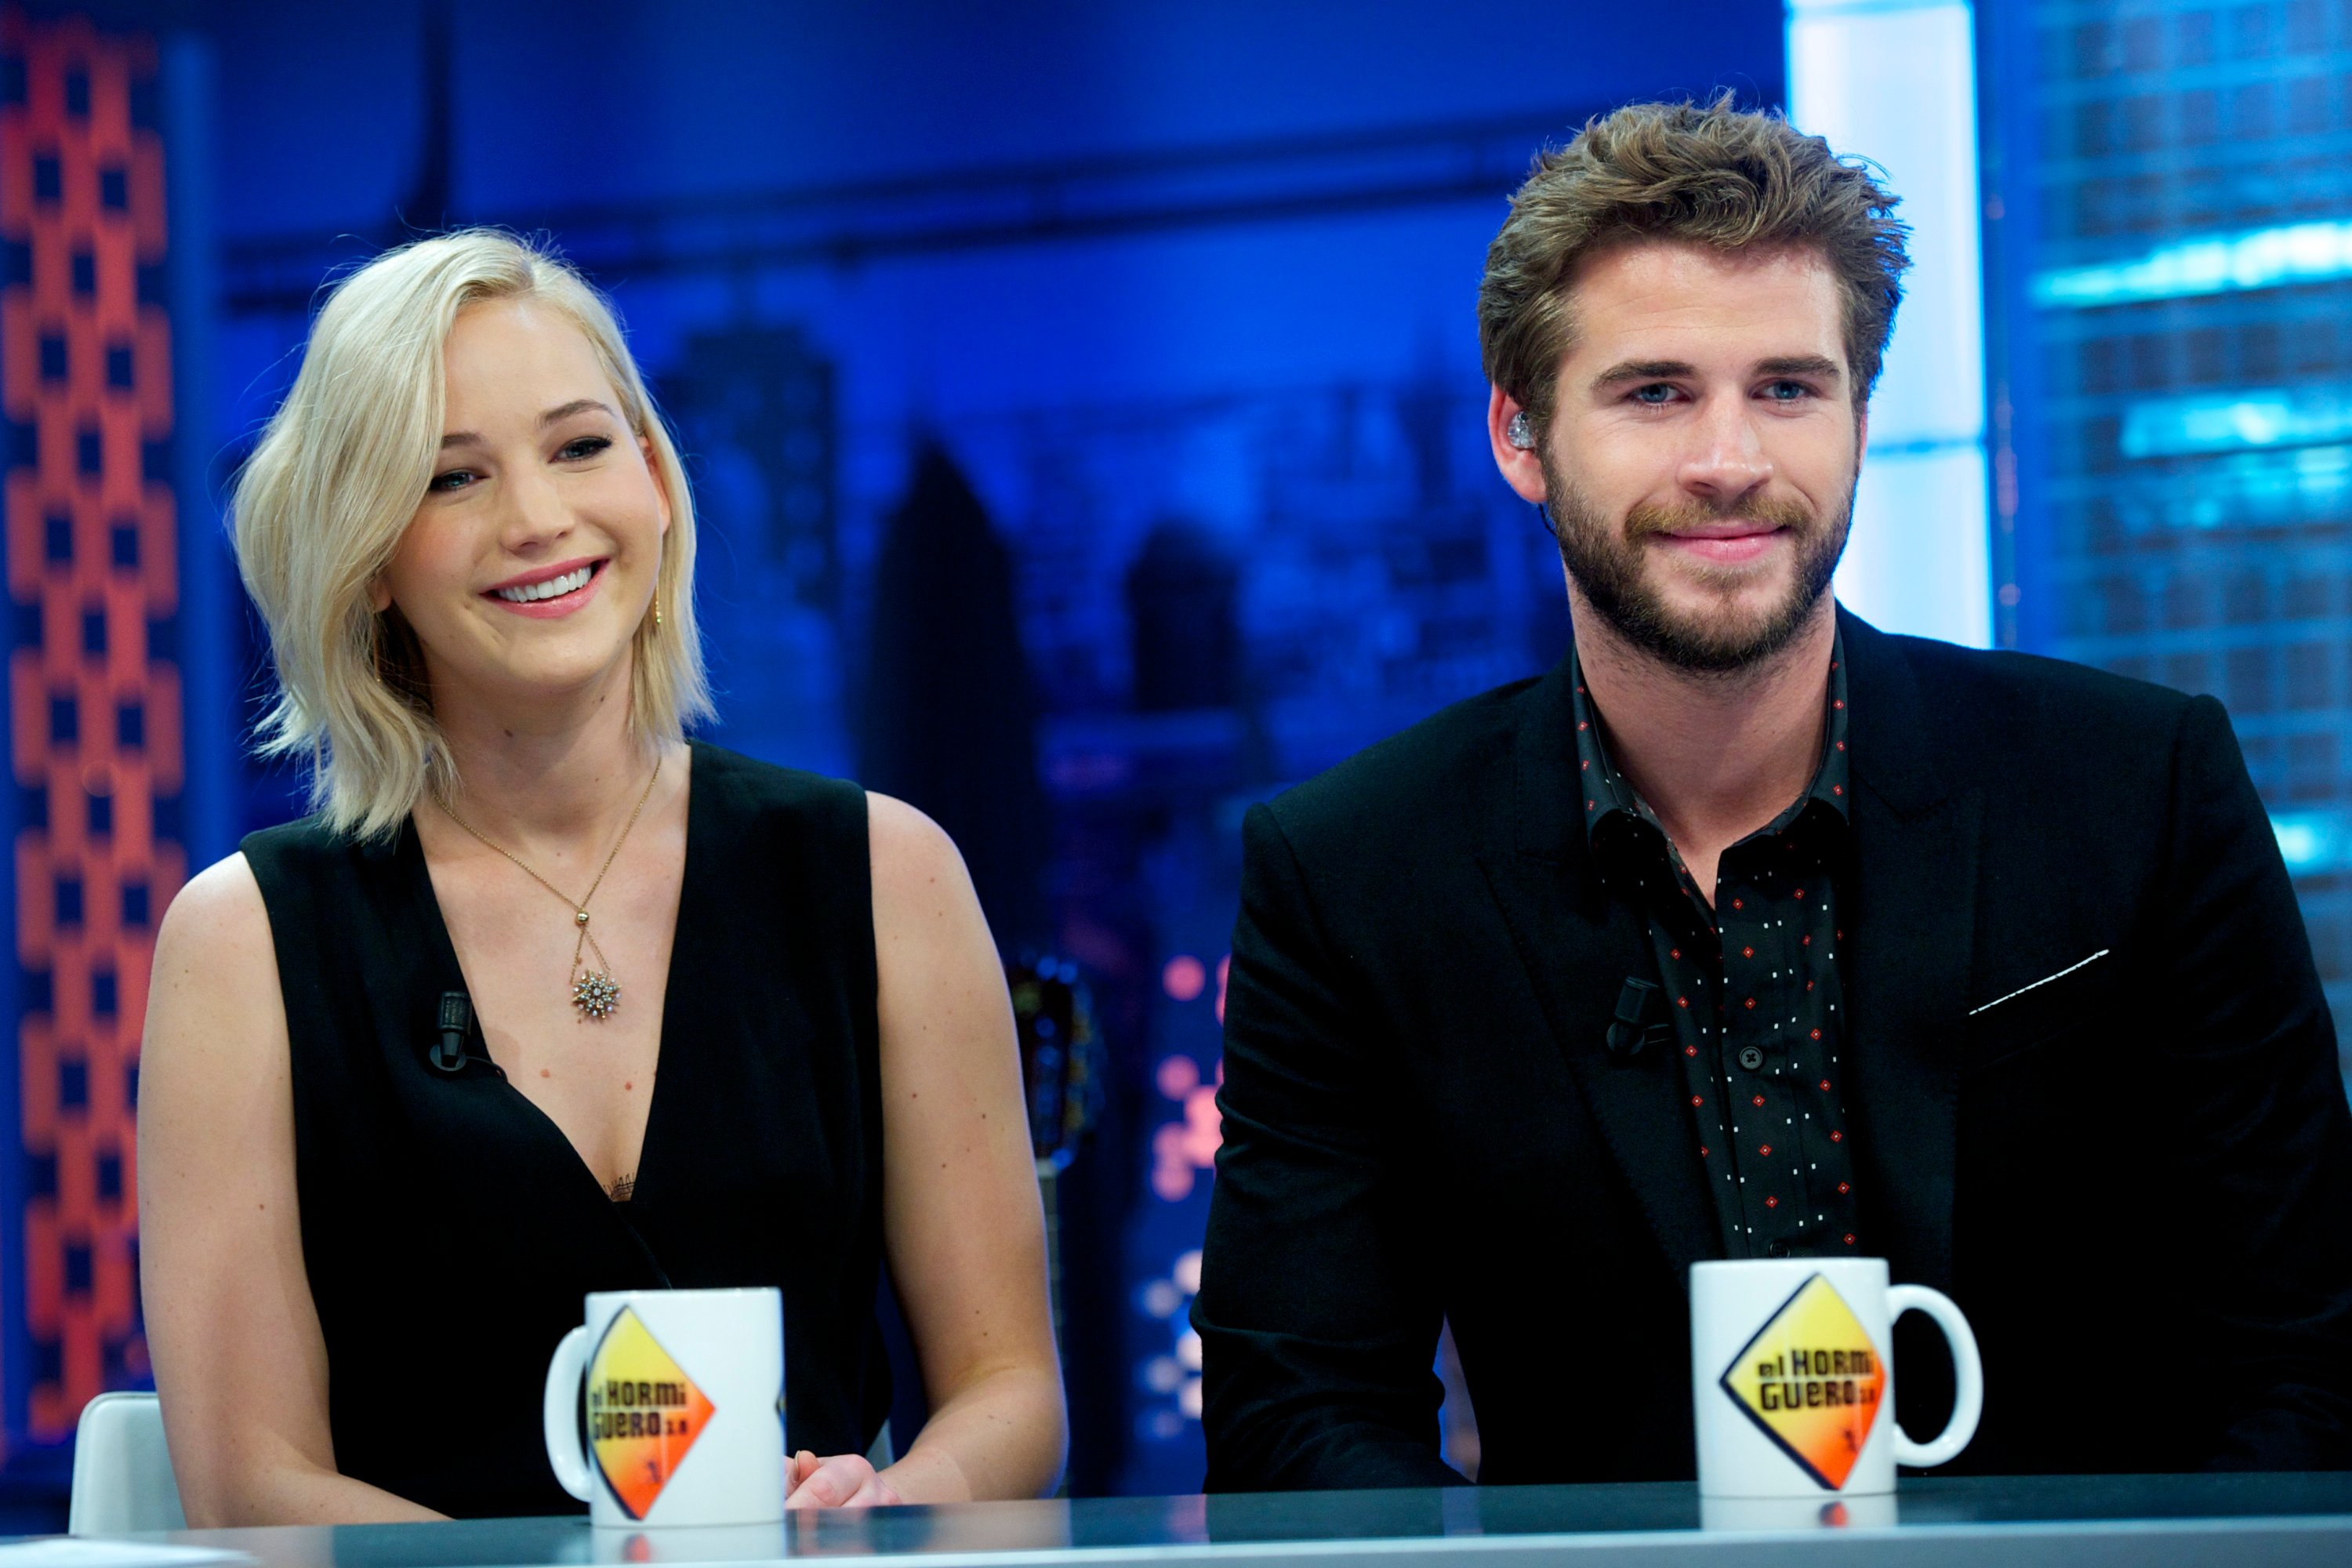 The Hunger Games movies stars Jennifer Lawrence and Liam Hemsworth